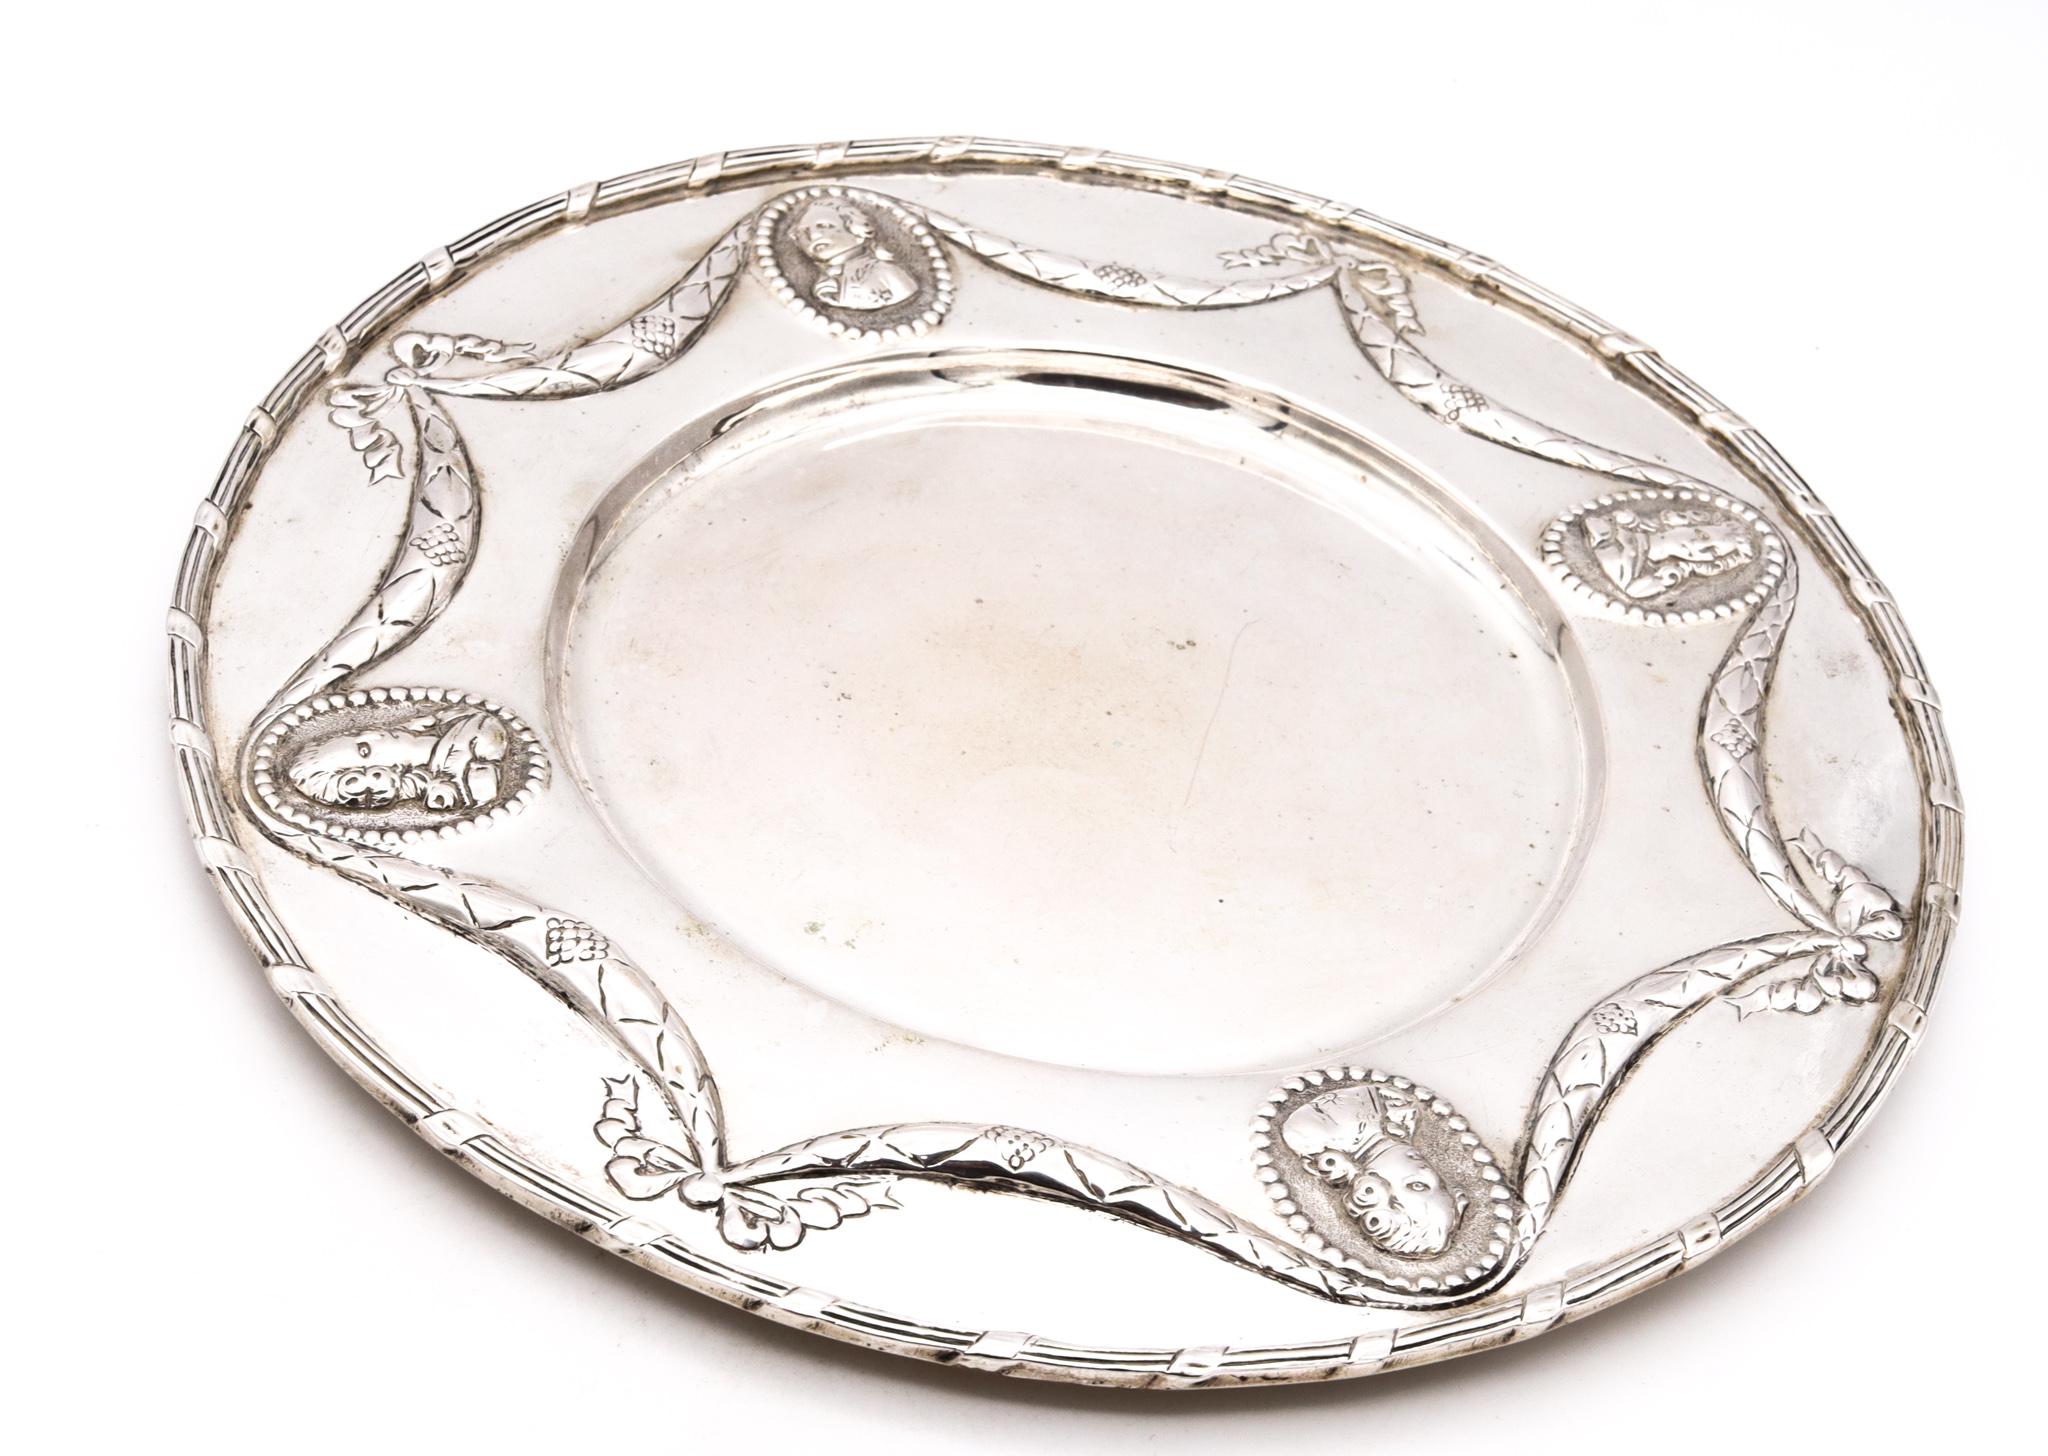 Germany Hanau 1820 Neoclassical Decorative Dish Plate in Solid Sterling Silver For Sale 2